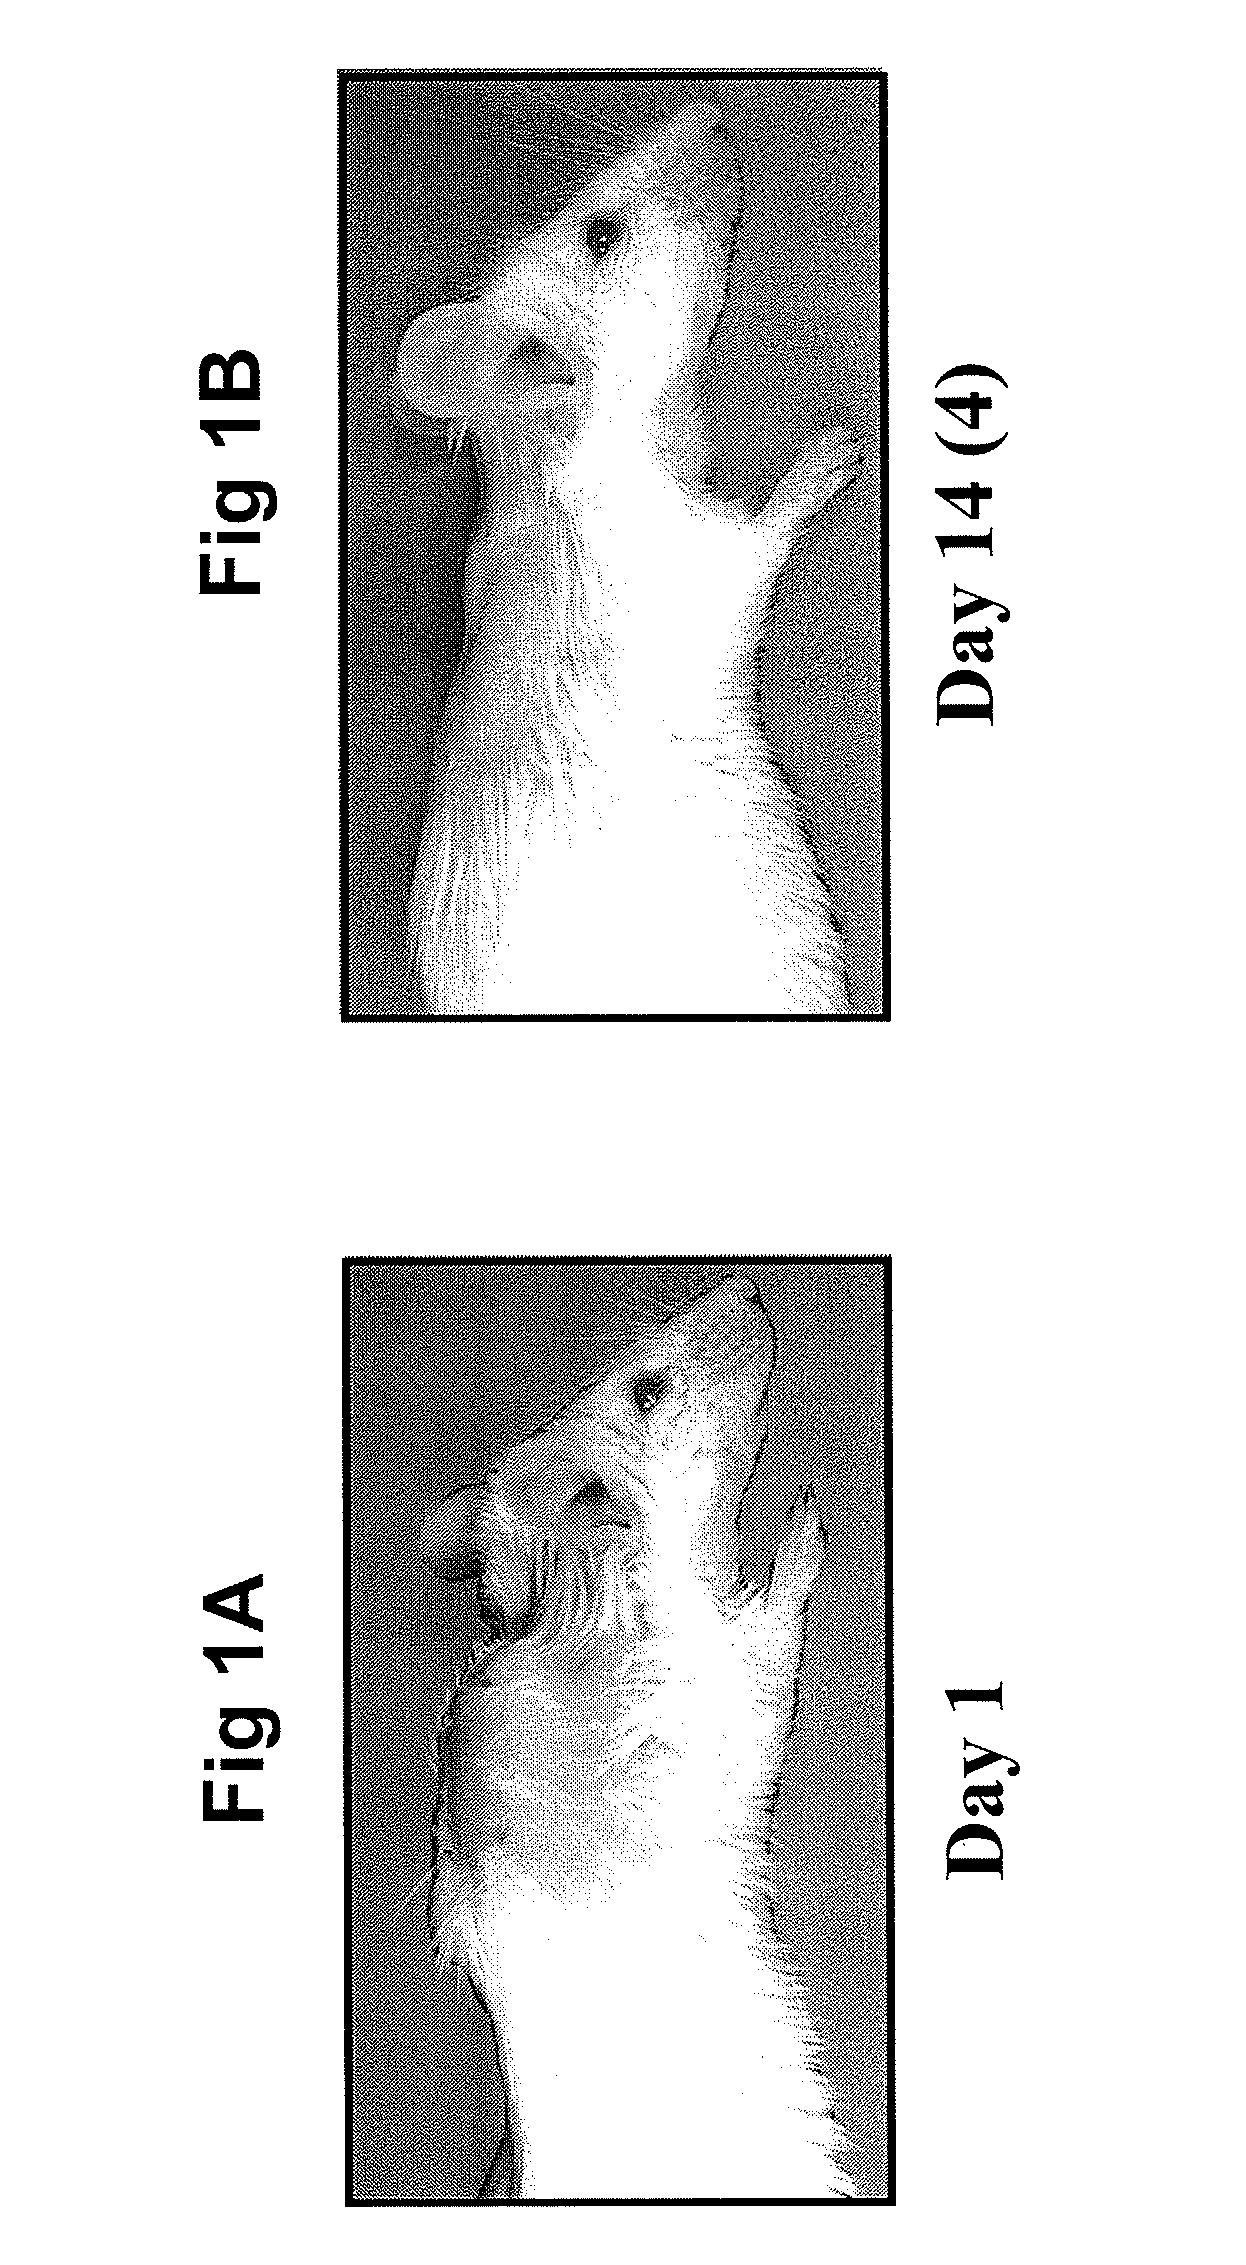 Methods for amyloid removal using anti-amyloid antibodies